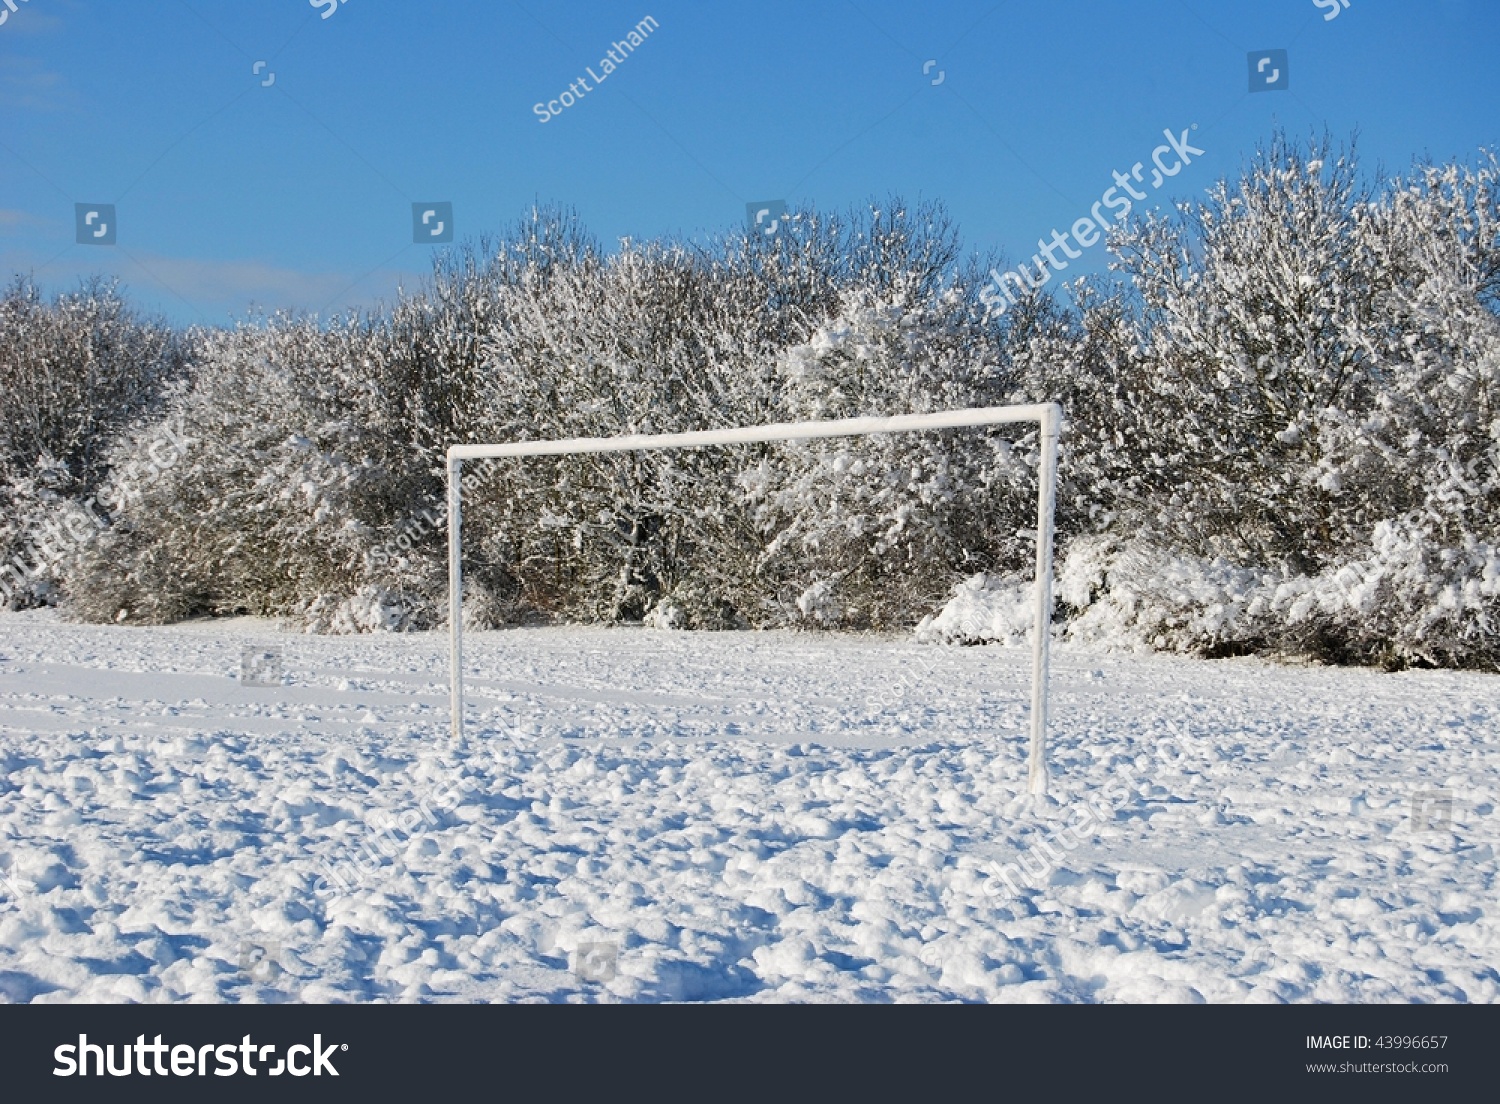 Football Pitch (Soccer Field) In Winter Snow Stock Photo 43996657